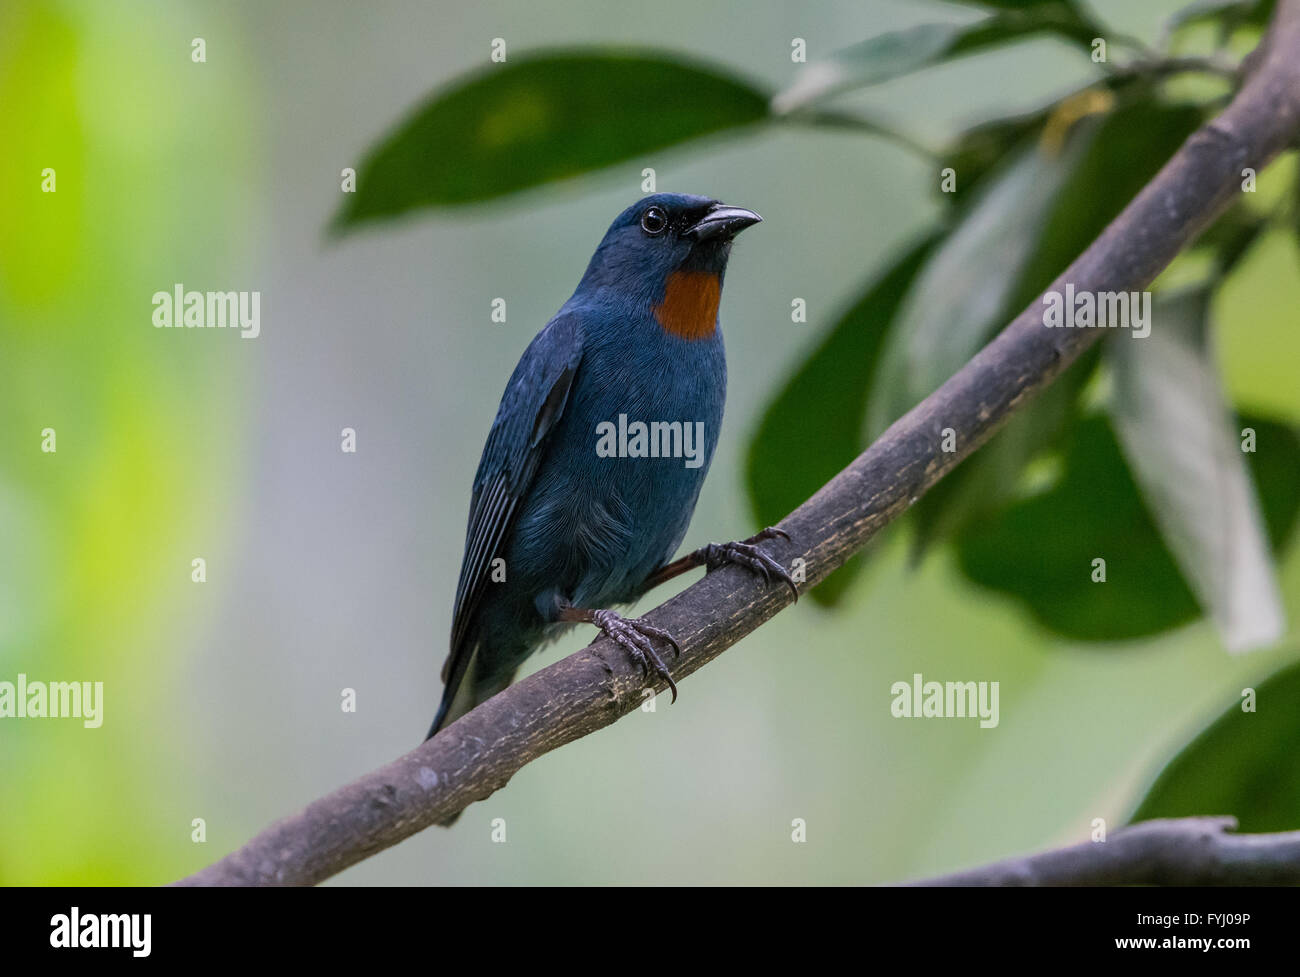 A male Orangequit (Euneornis campestris), a Jamaica endemic species, perched on a branch. Jamaica, Caribbeans. Stock Photo